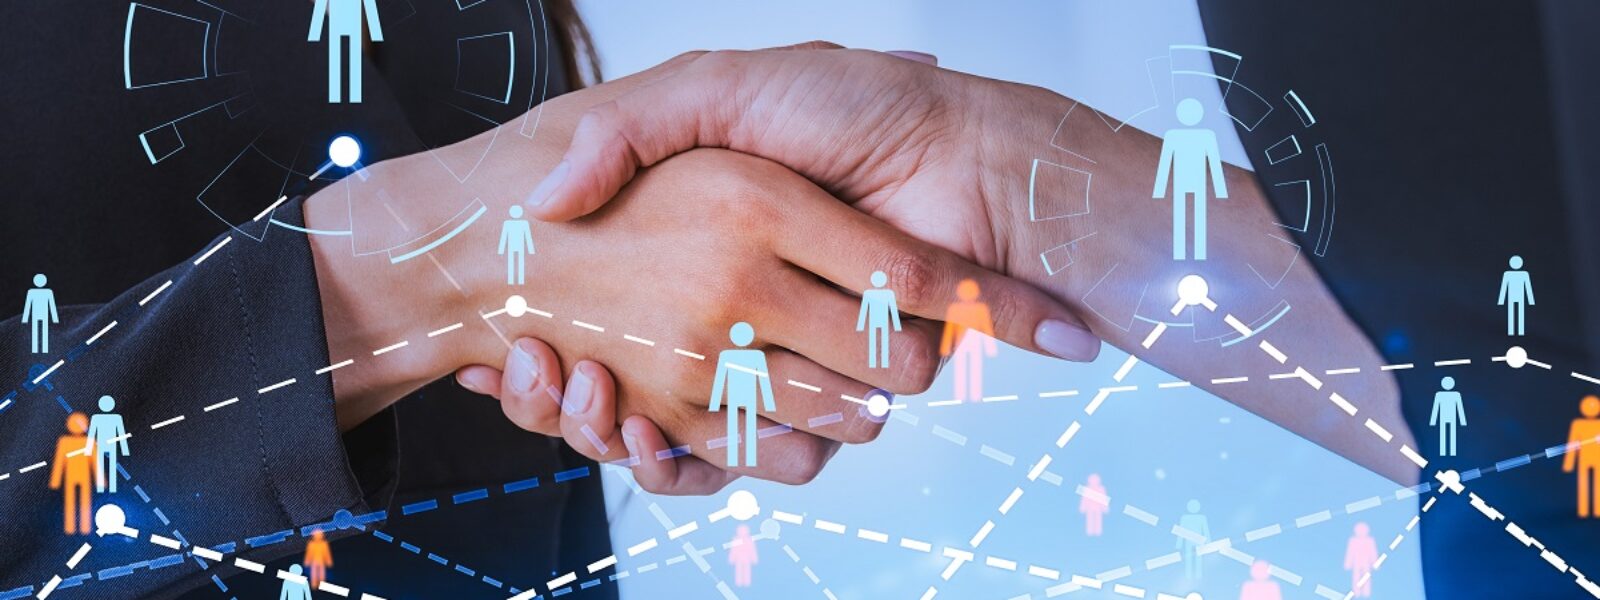 AdobeStock_480687631_Office women handshake, people icons and connection